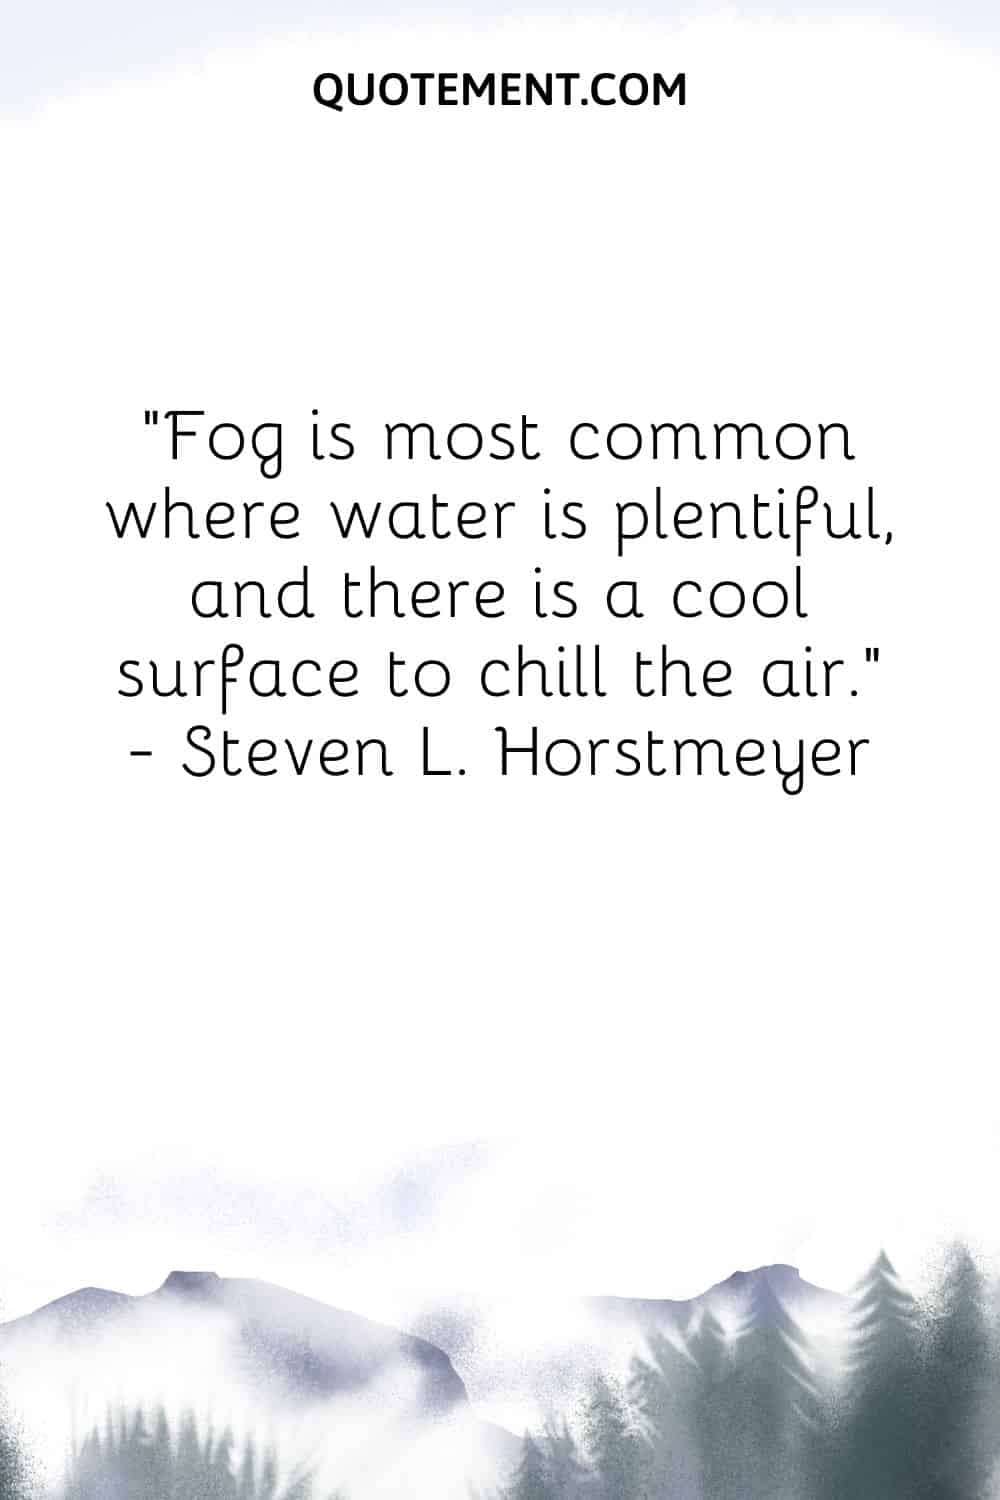 Fog is most common where water is plentiful, and there is a cool surface to chill the air.